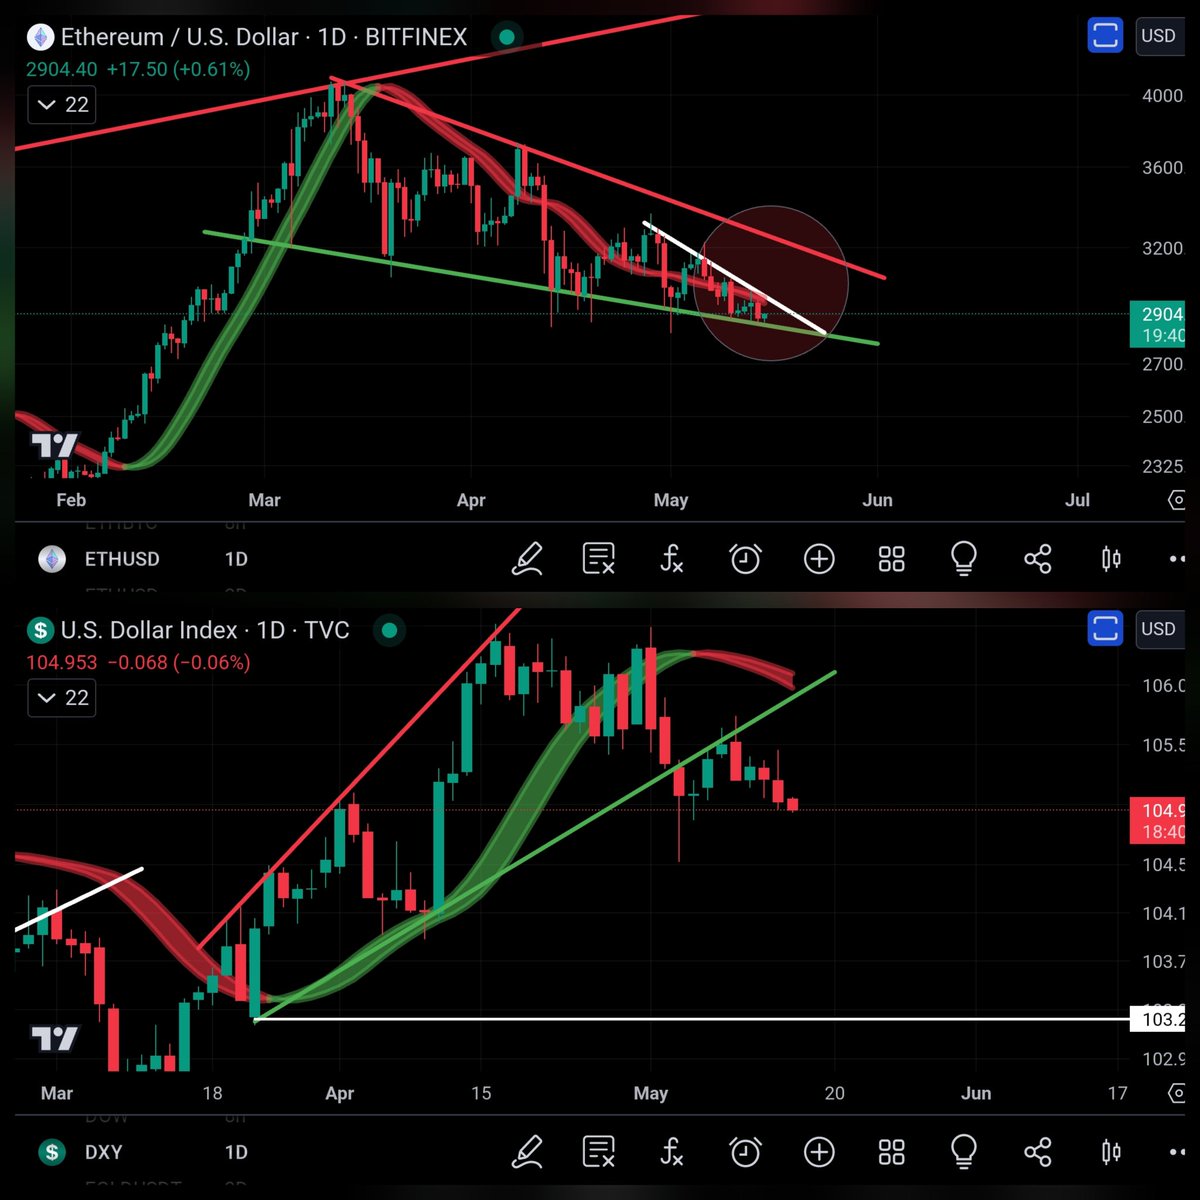 One of these charts is creating a potential bullish pattern. Which one is it? 
#ethereum vs #dxy